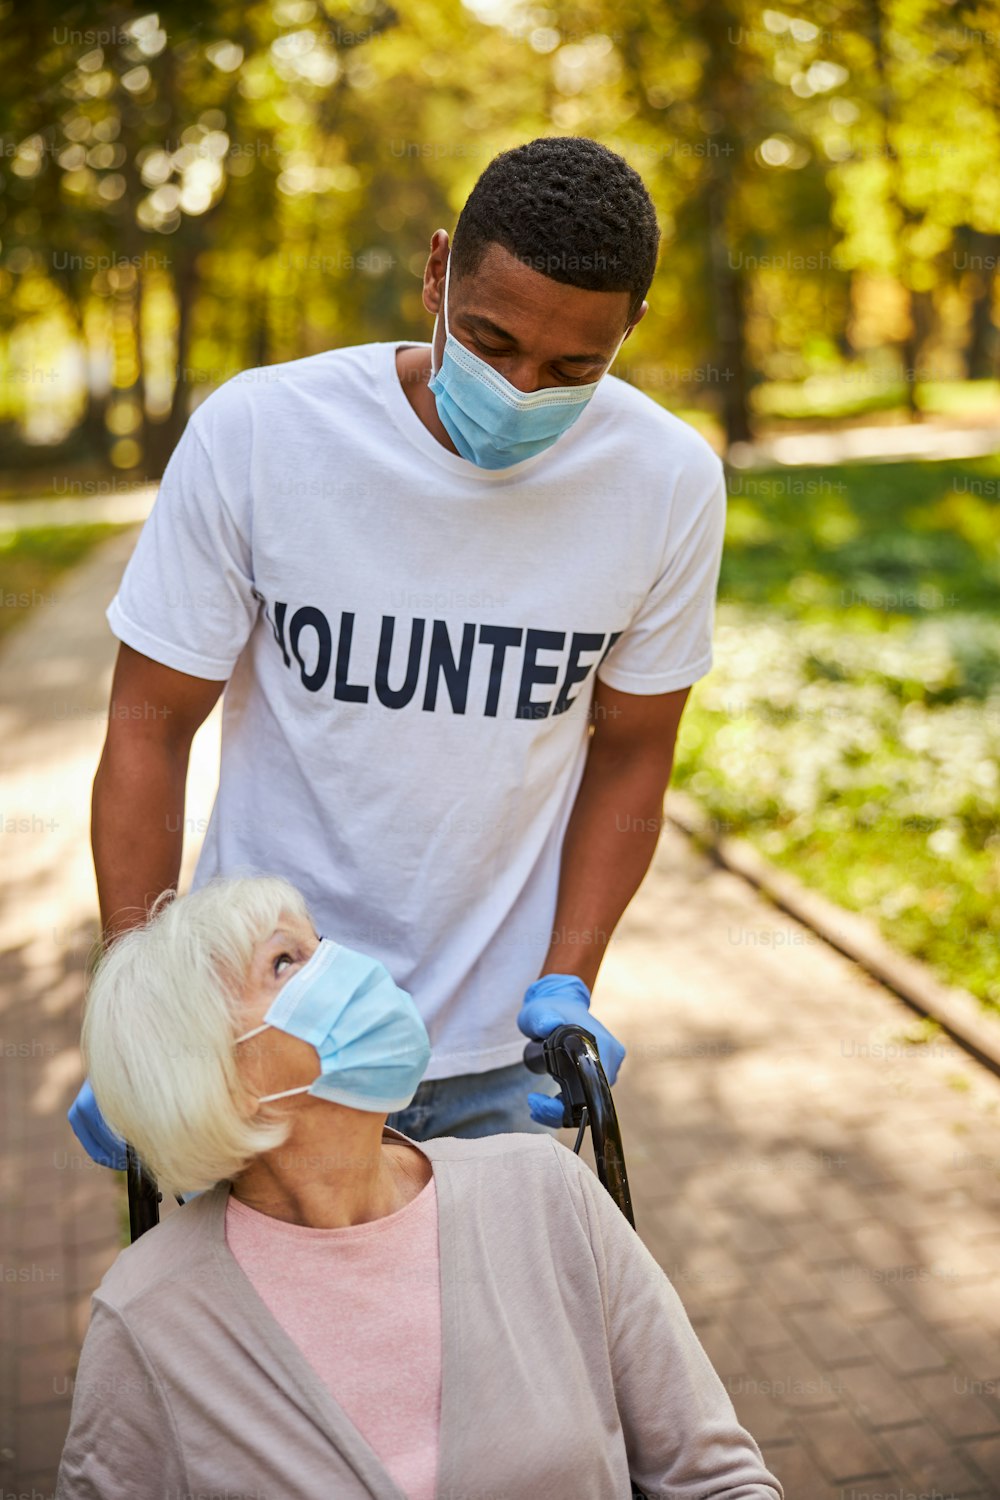 Caring volunteer in a white T-shirt and blue gloves assisting a retired woman and rolling her wheelchair on the road